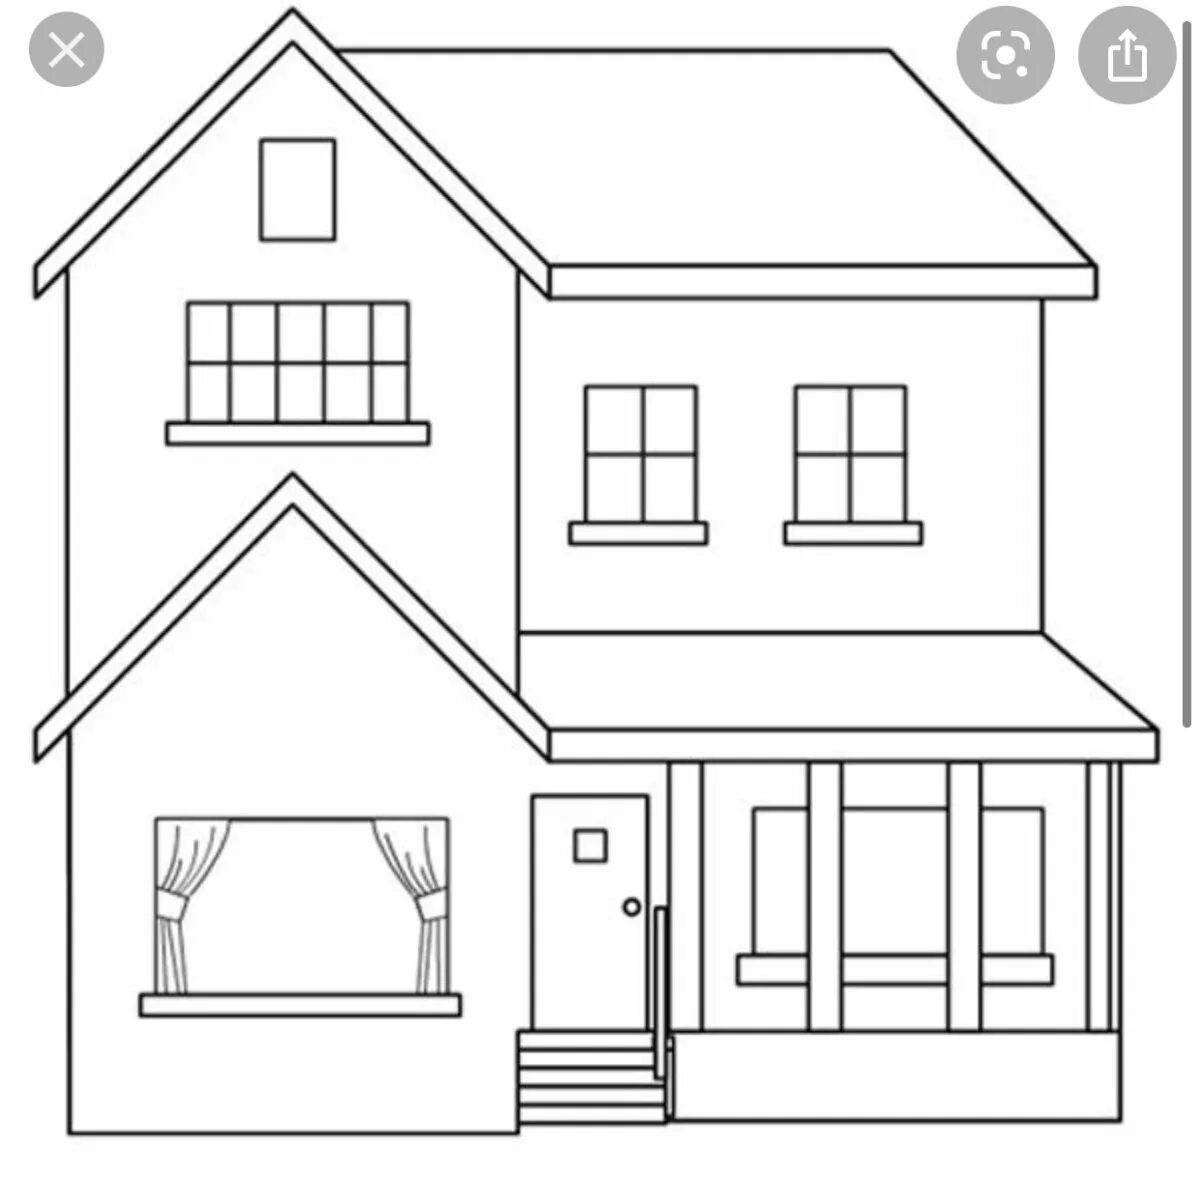 Coloring book shiny two-story house